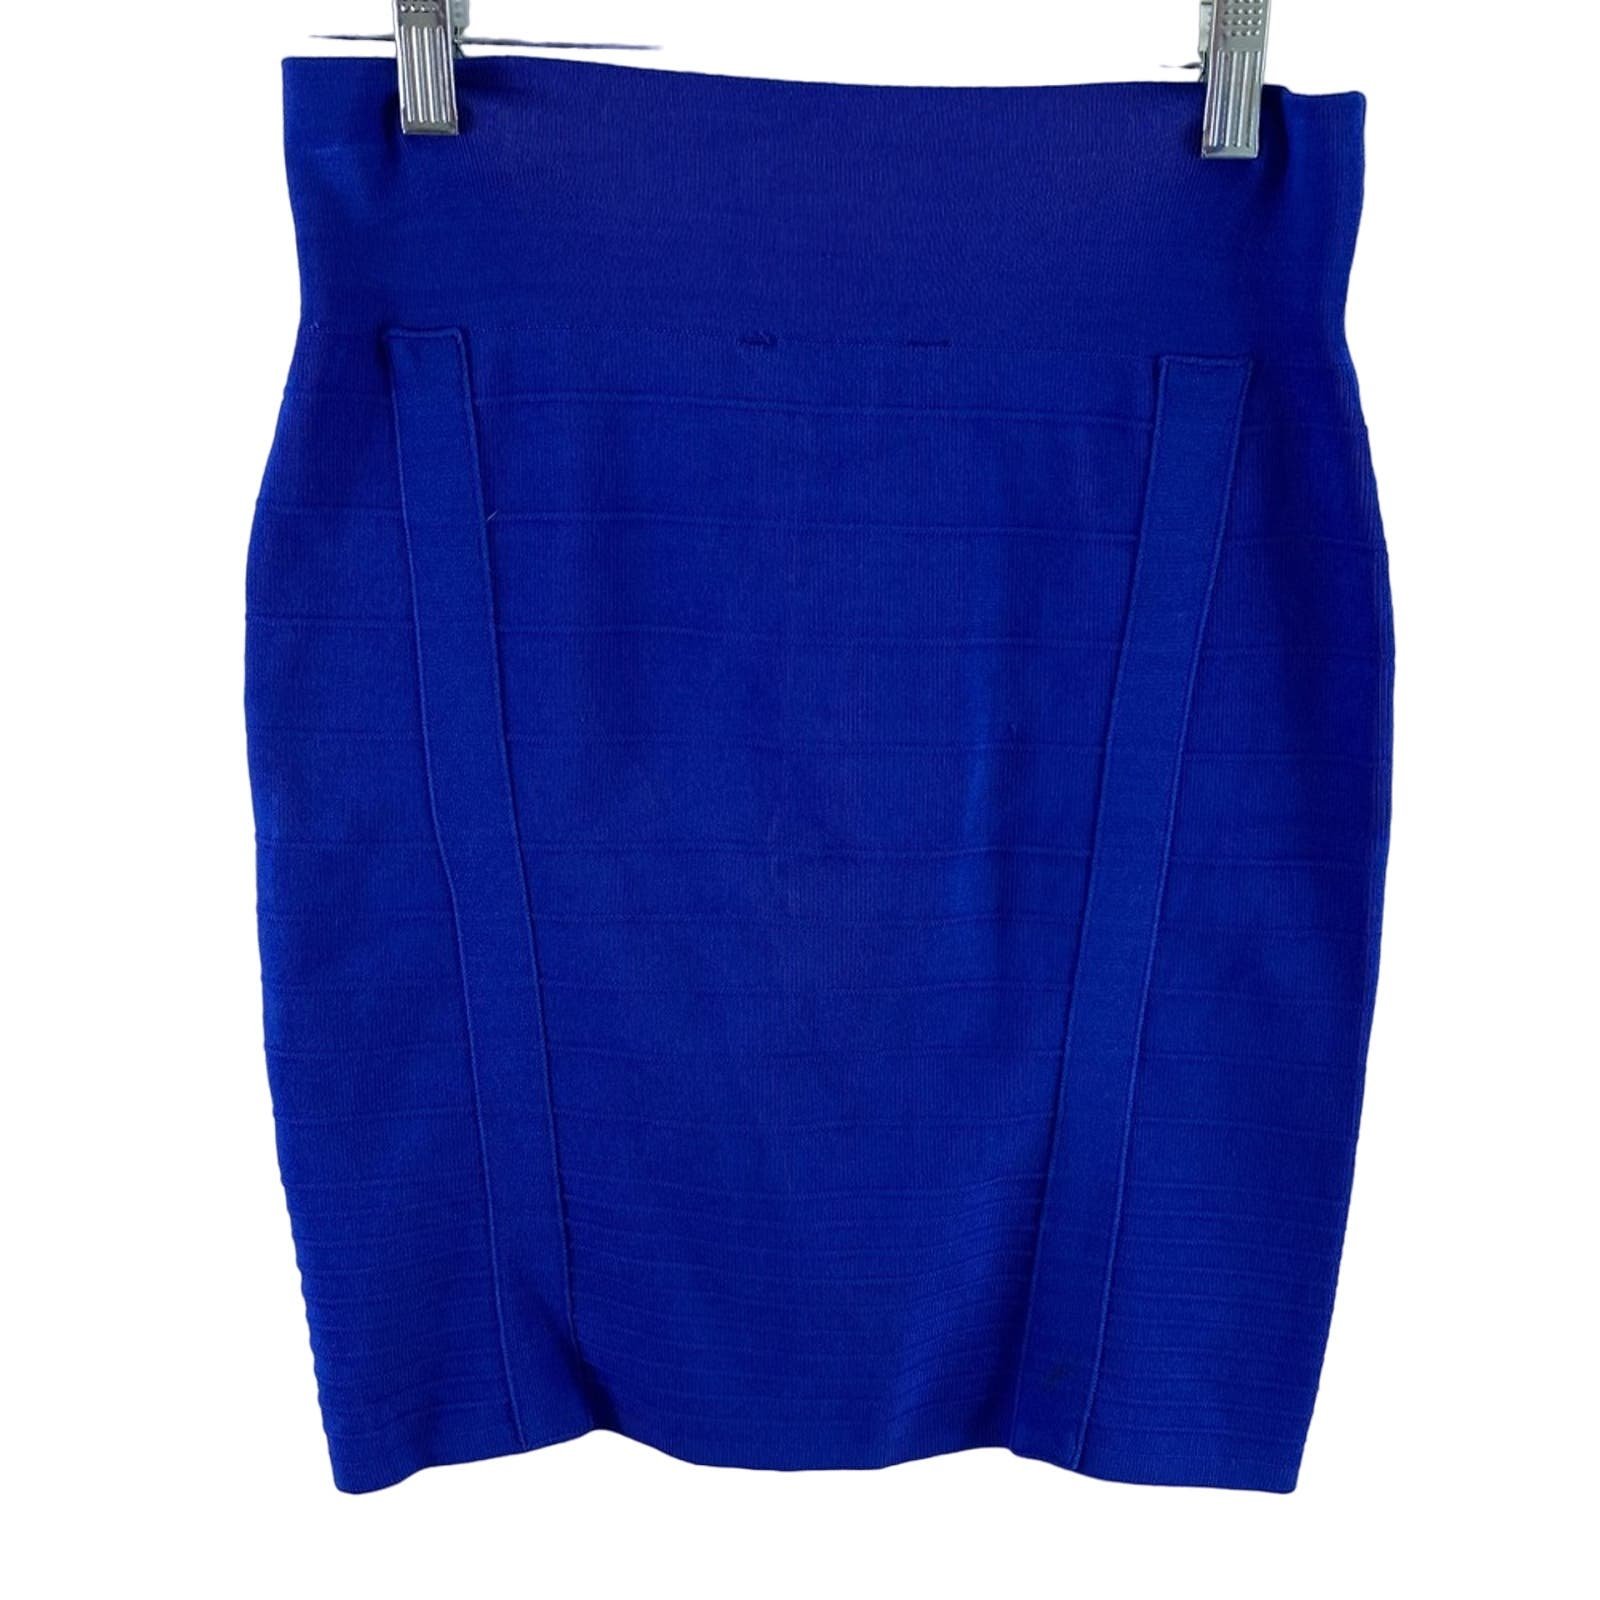 Fashion Rock & Republic Royal Blue High Waisted Jersey Knit Bodycon Skirt Size S lQOEiatdQ Online Exclusive